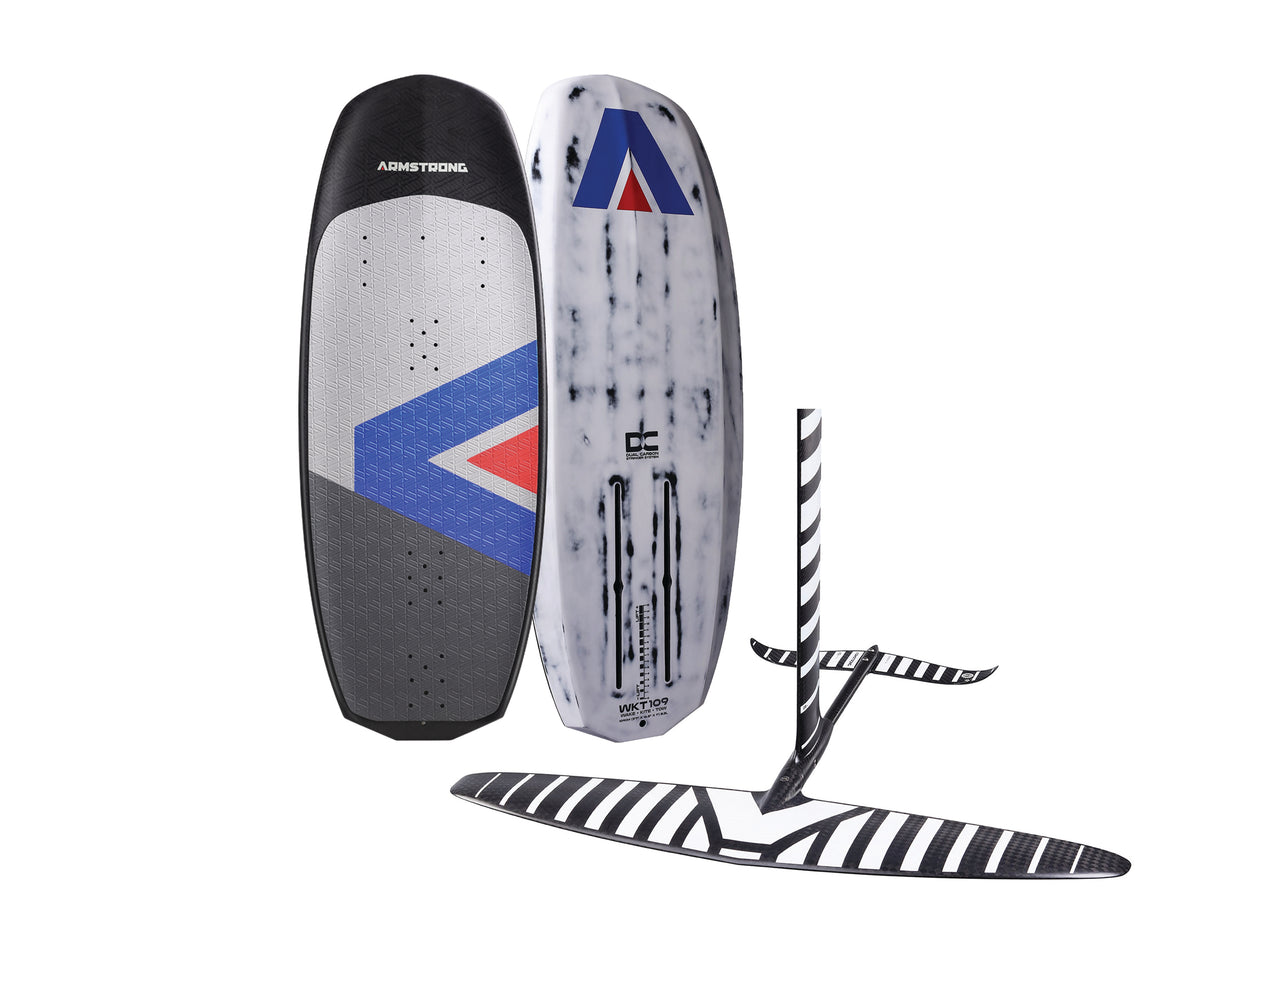 Armstrong Wakefoil Board W/ Armstrong HS1550 Foil Kit Package